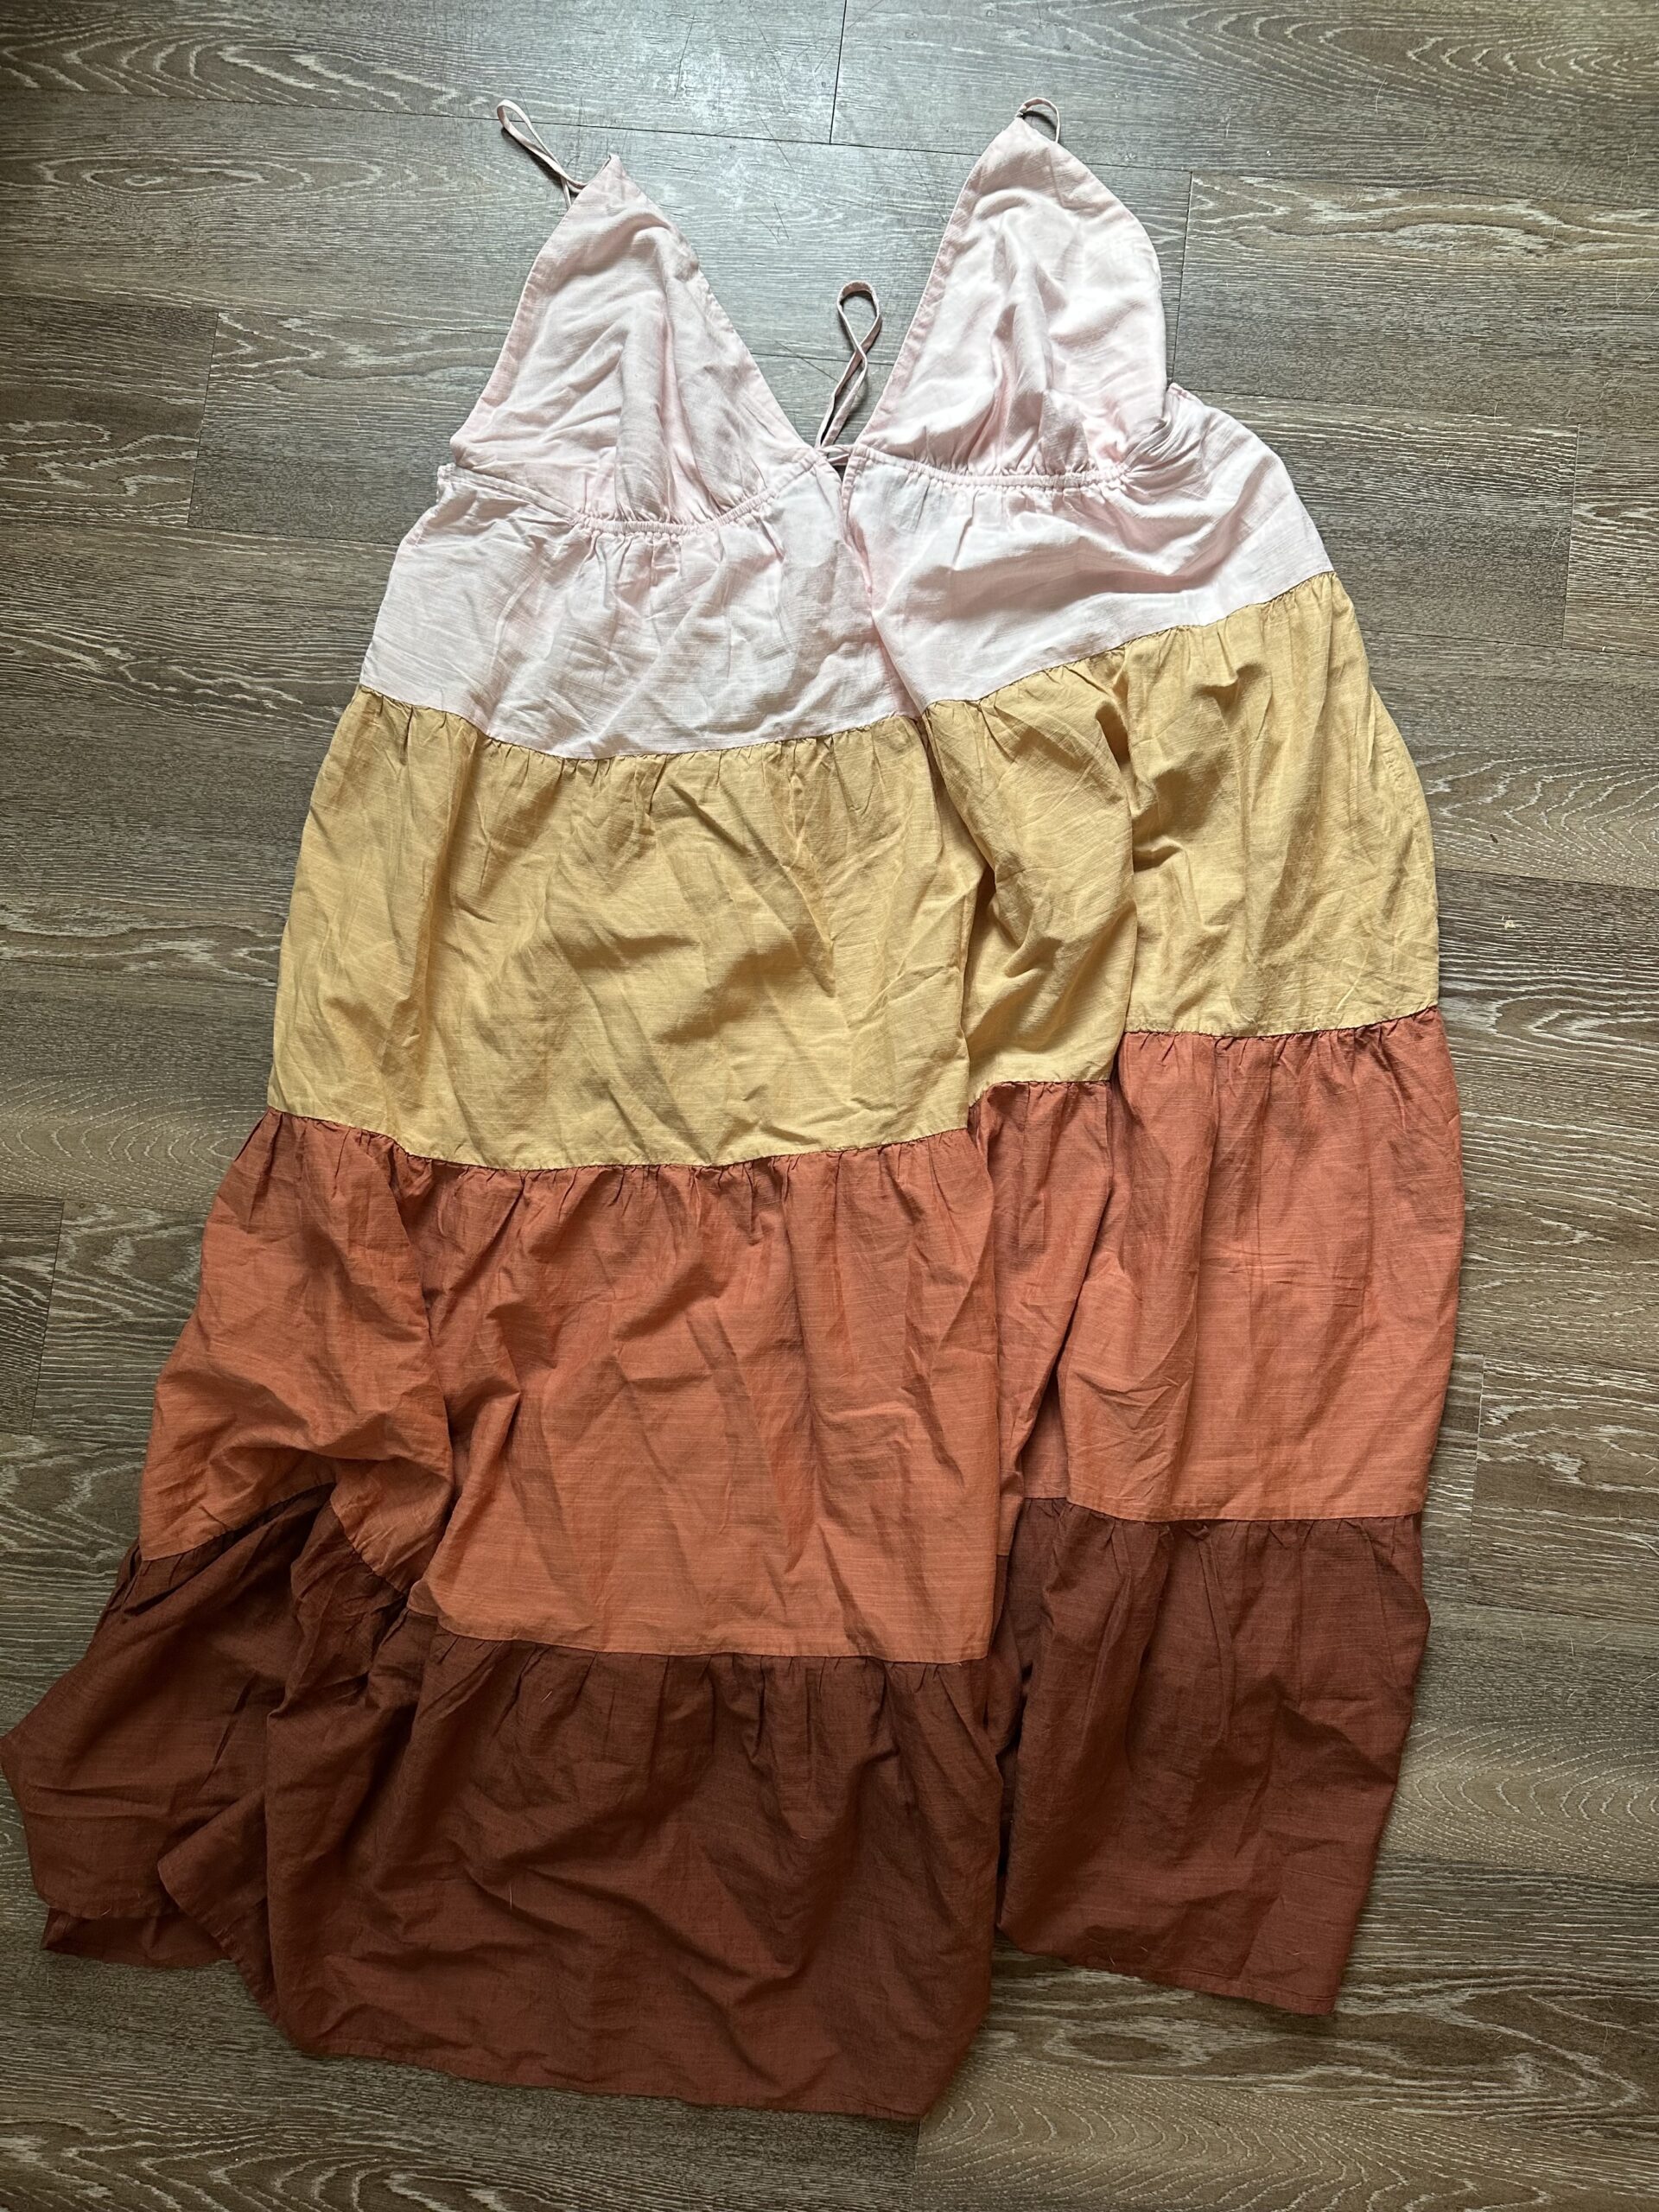 A sleeveless, tiered summer dress with horizontal stripes in shades of pink, beige, yellow, and red, displayed on a wooden floor.